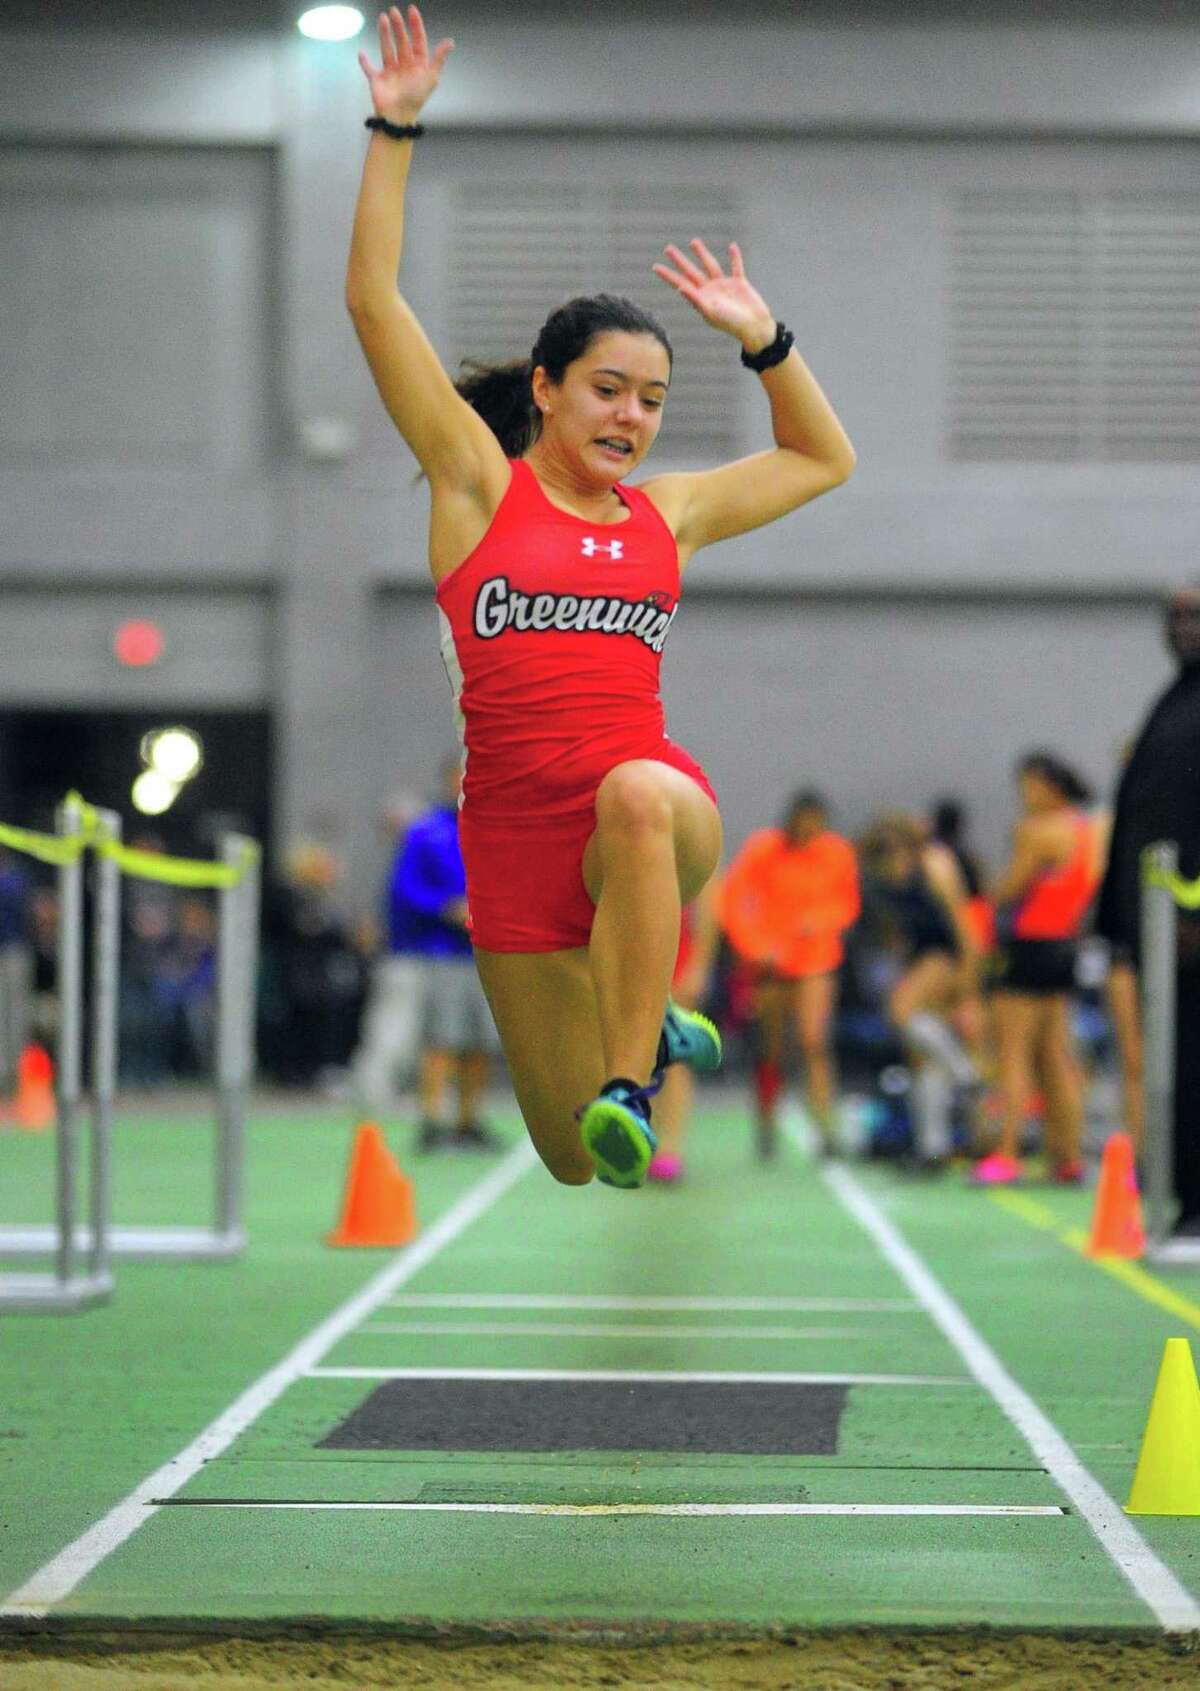 Greenwich’s Caroline Carvalho competes in the long jump during the FCIAC Indoor Track and Field Championships on Thursday in New Haven. For complete coverage of the meet visit greenwichtime.com/sports.